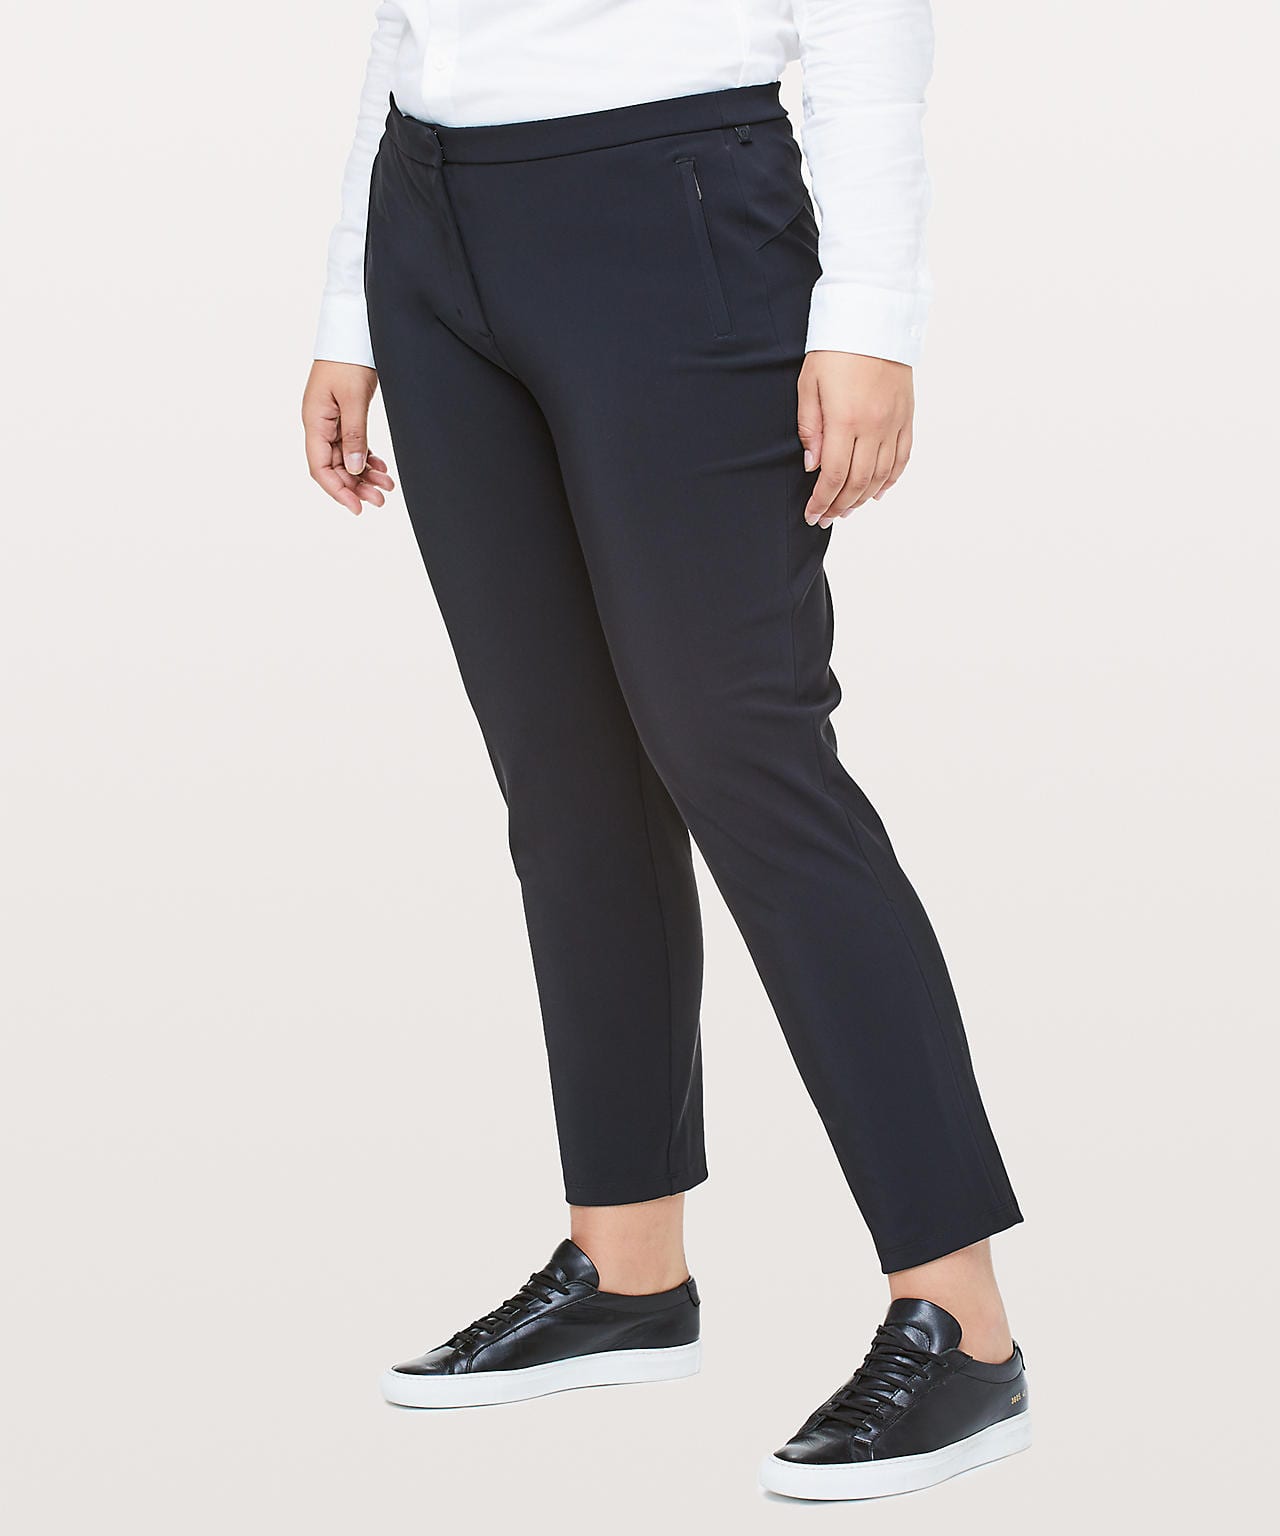 Lululemon On The Move Pant Reviewed Articles  International Society of  Precision Agriculture